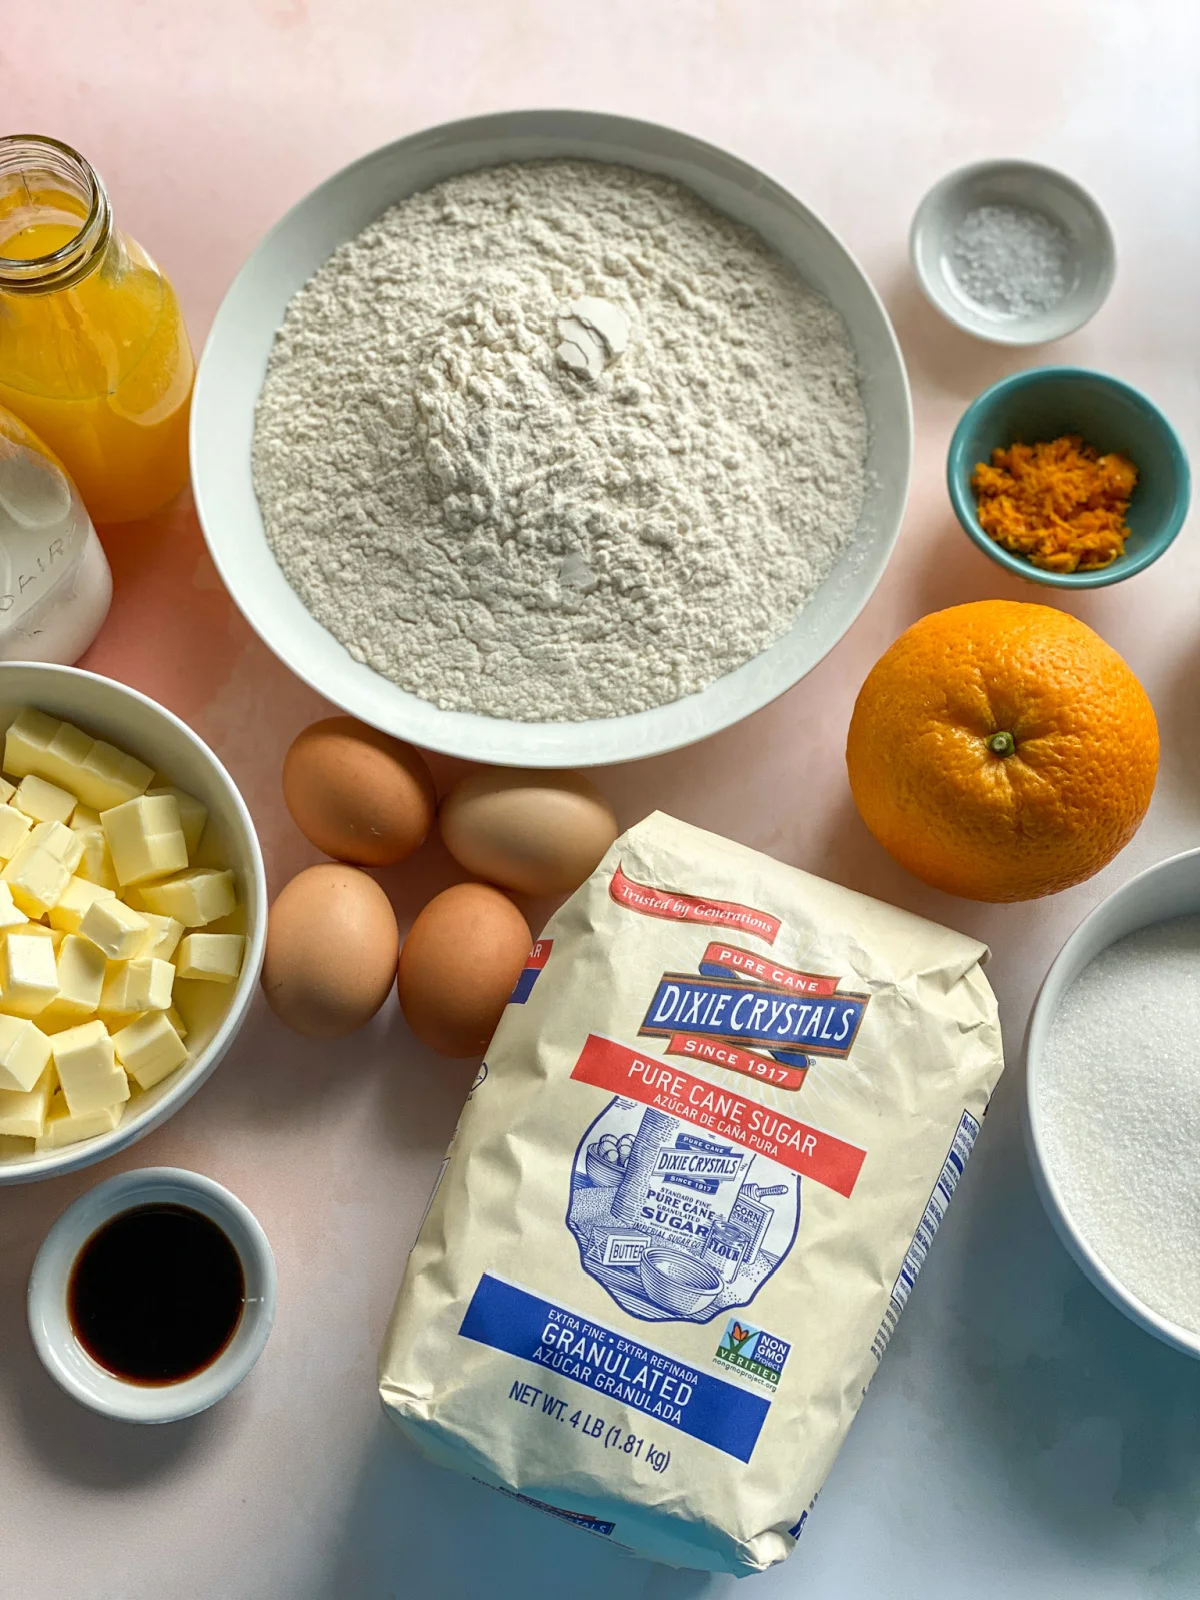 Ingredients include Dixie Crystals, butter, flour, orange juice and more